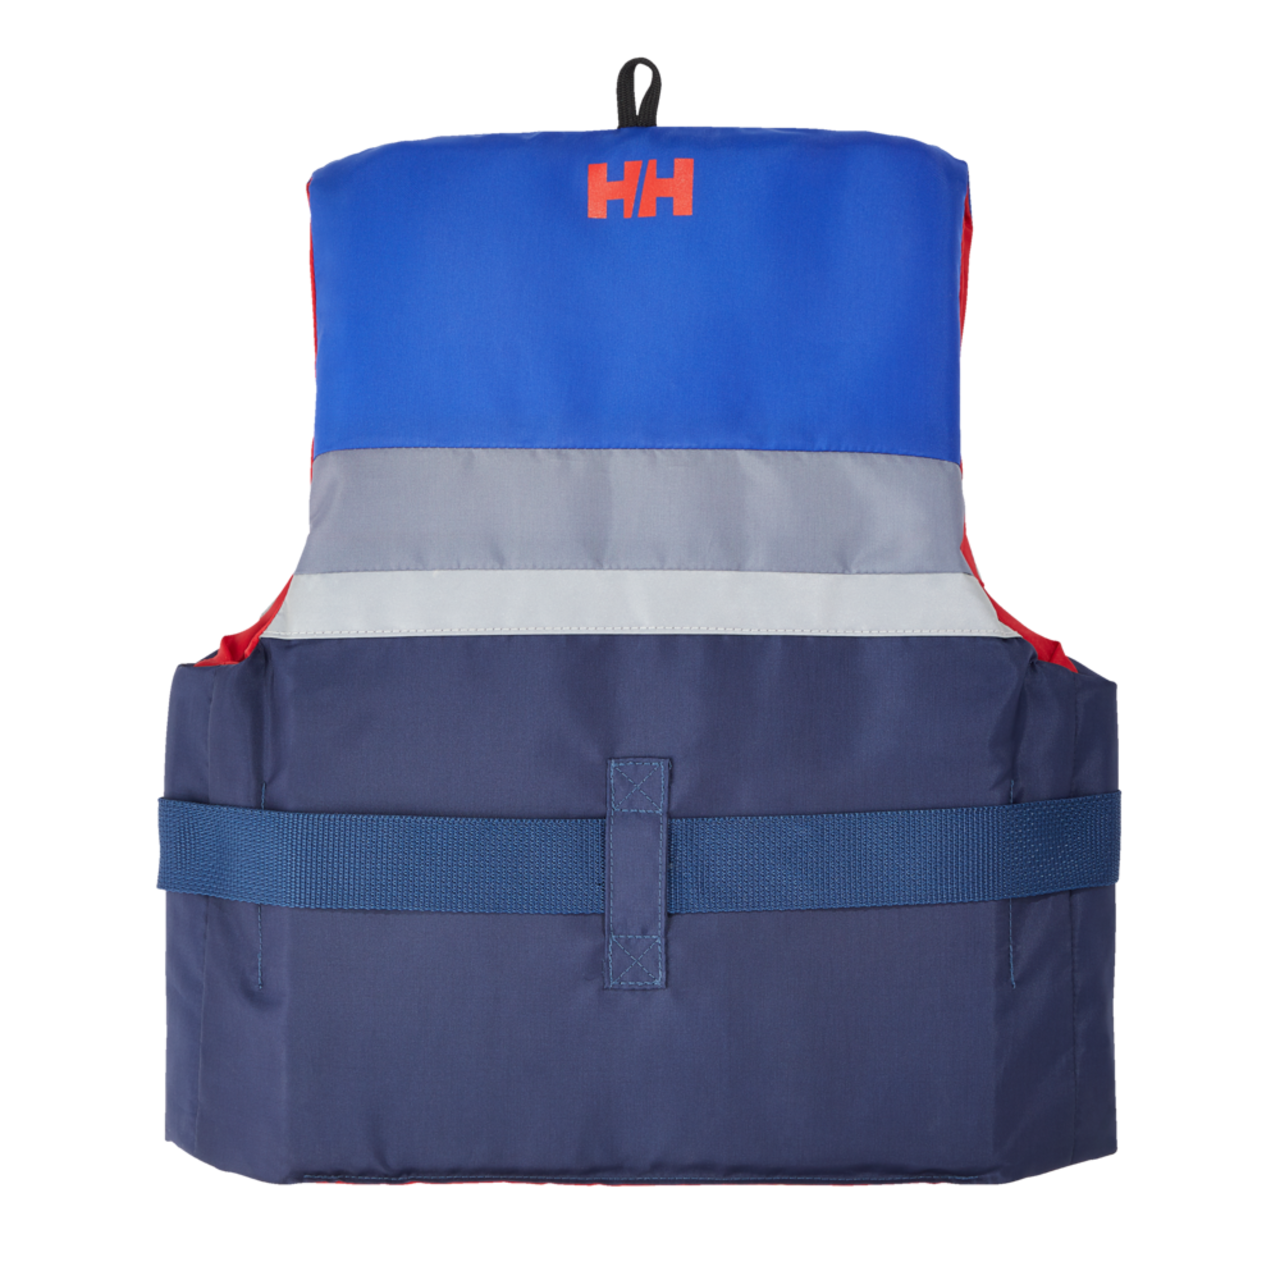 https://media-www.canadiantire.ca/product/playing/seasonal-recreation/marine-water-fun/0793014/helly-hansen-60-90lb-youth-woven-polymer-pfd-3f4a4146-1434-4632-b81e-d0cbd906753f.png?imdensity=1&imwidth=1244&impolicy=mZoom